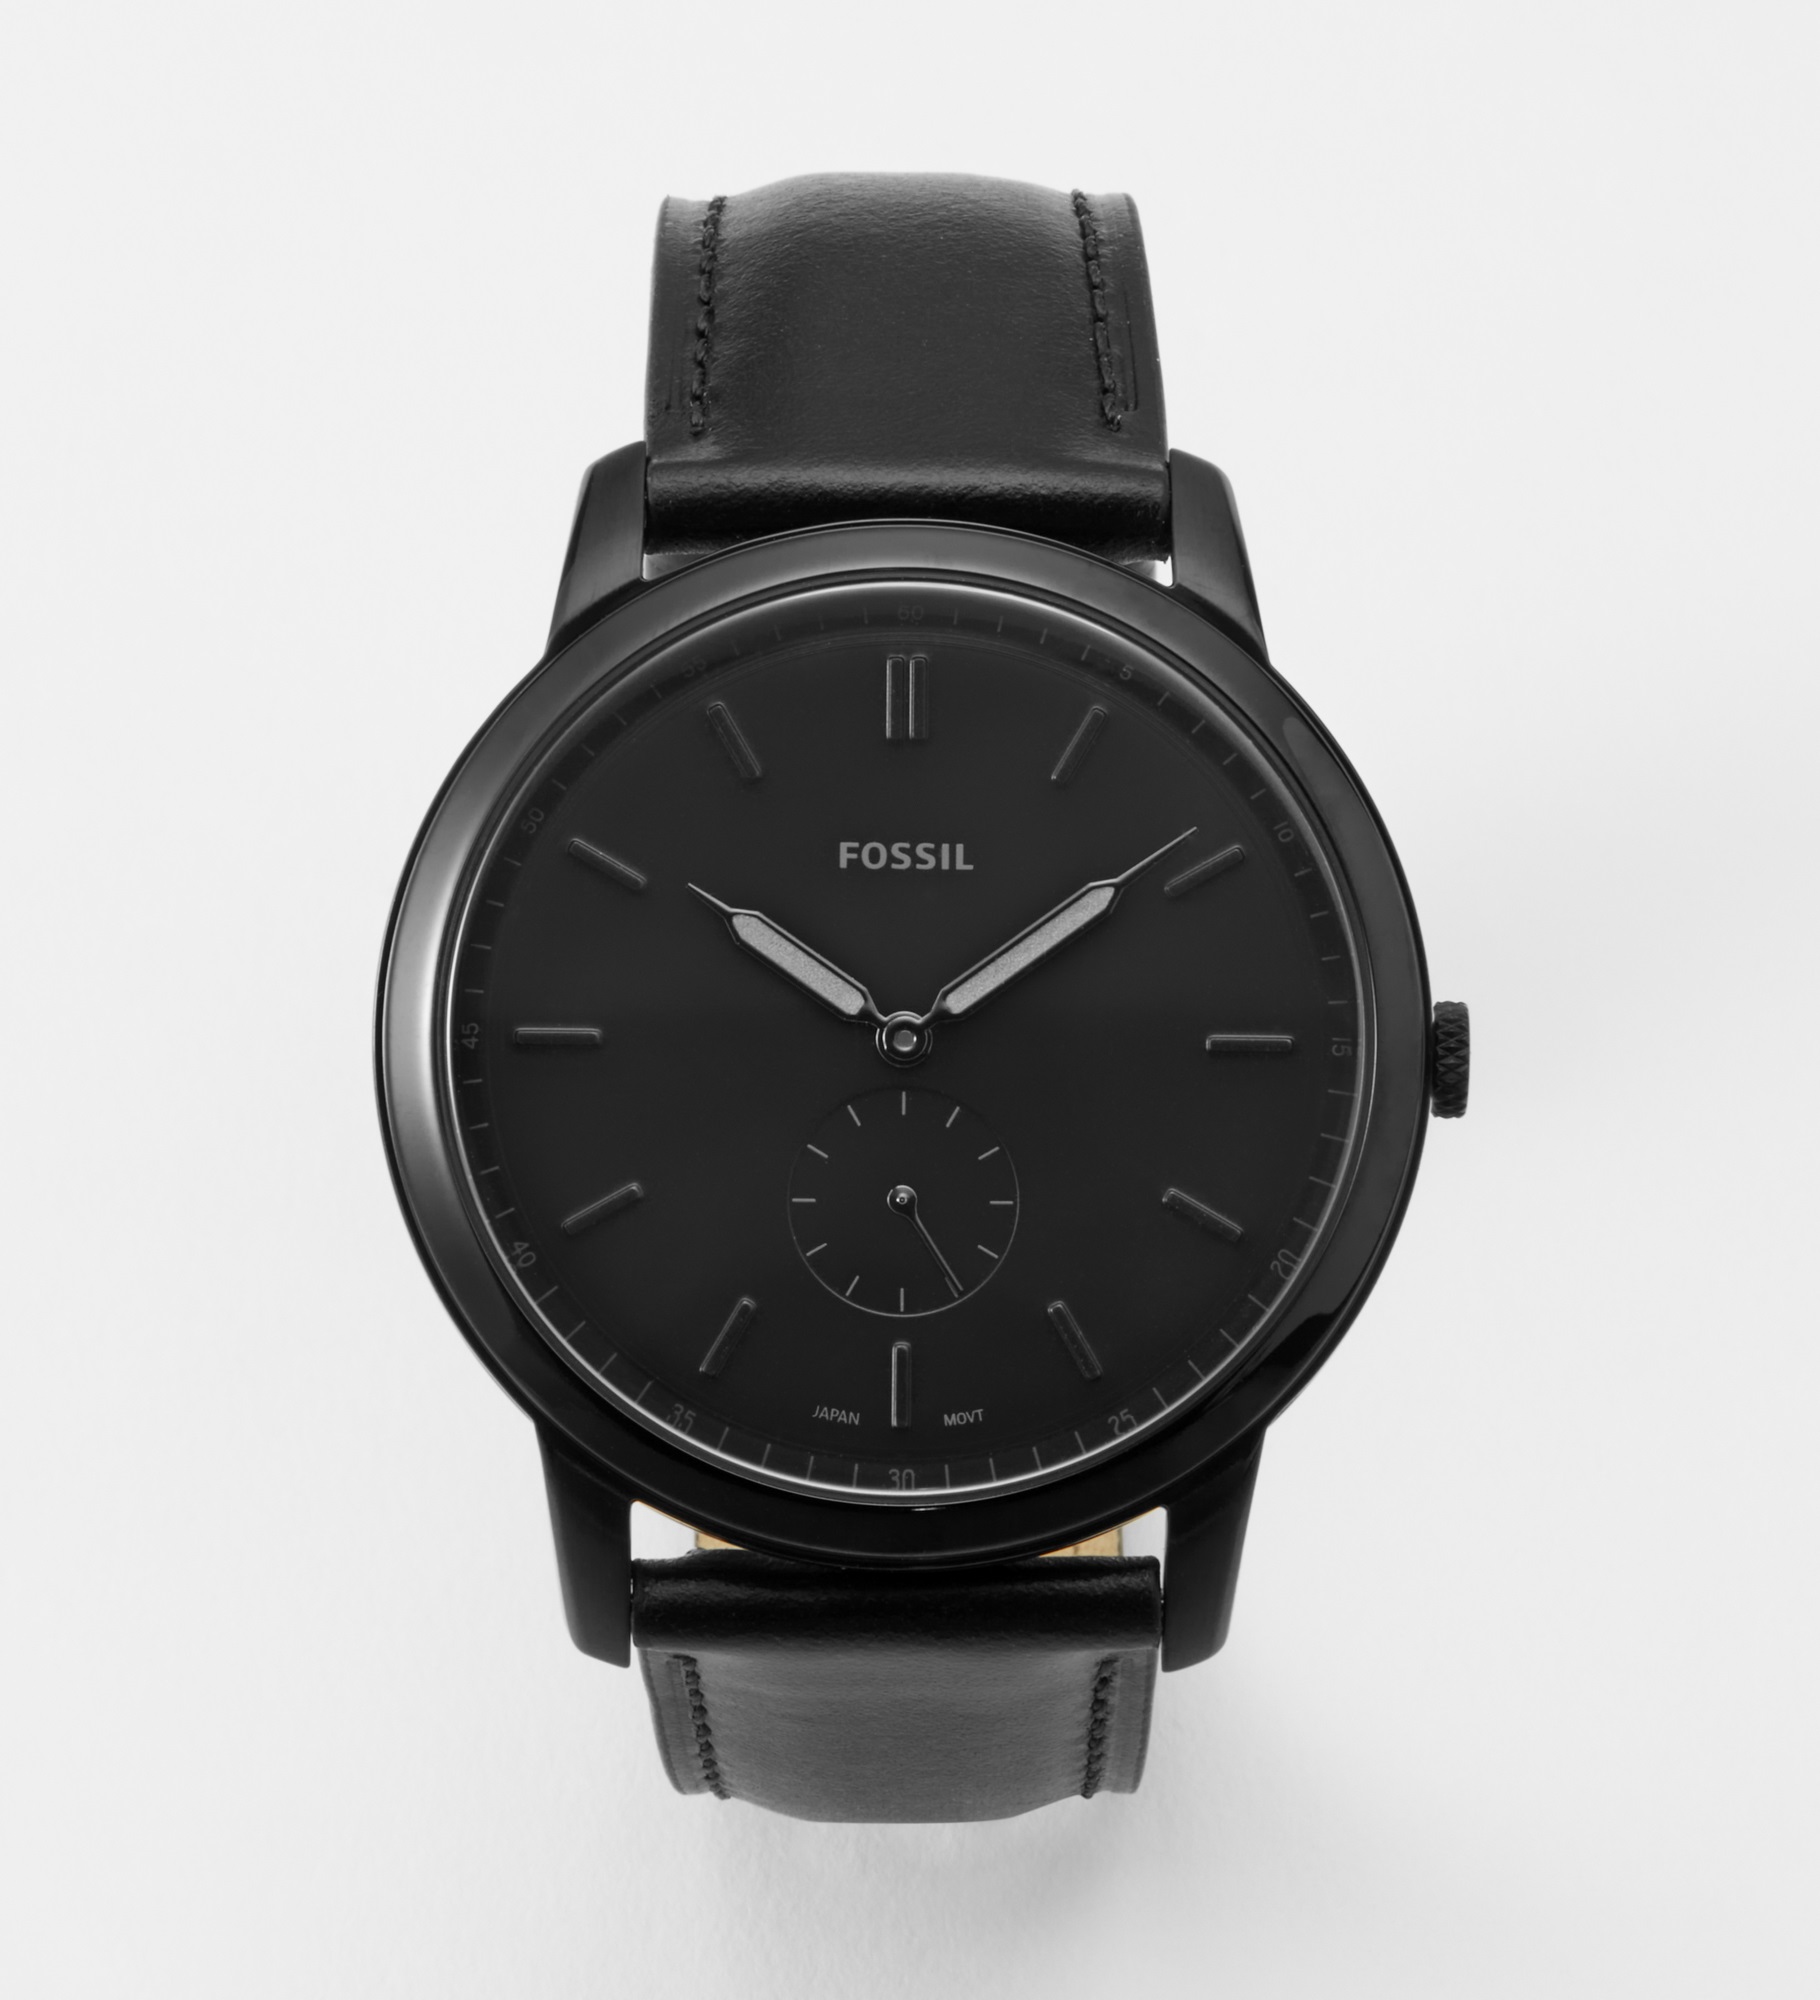 Engraved Fossil Minimalist Watch with Black Leather Strap